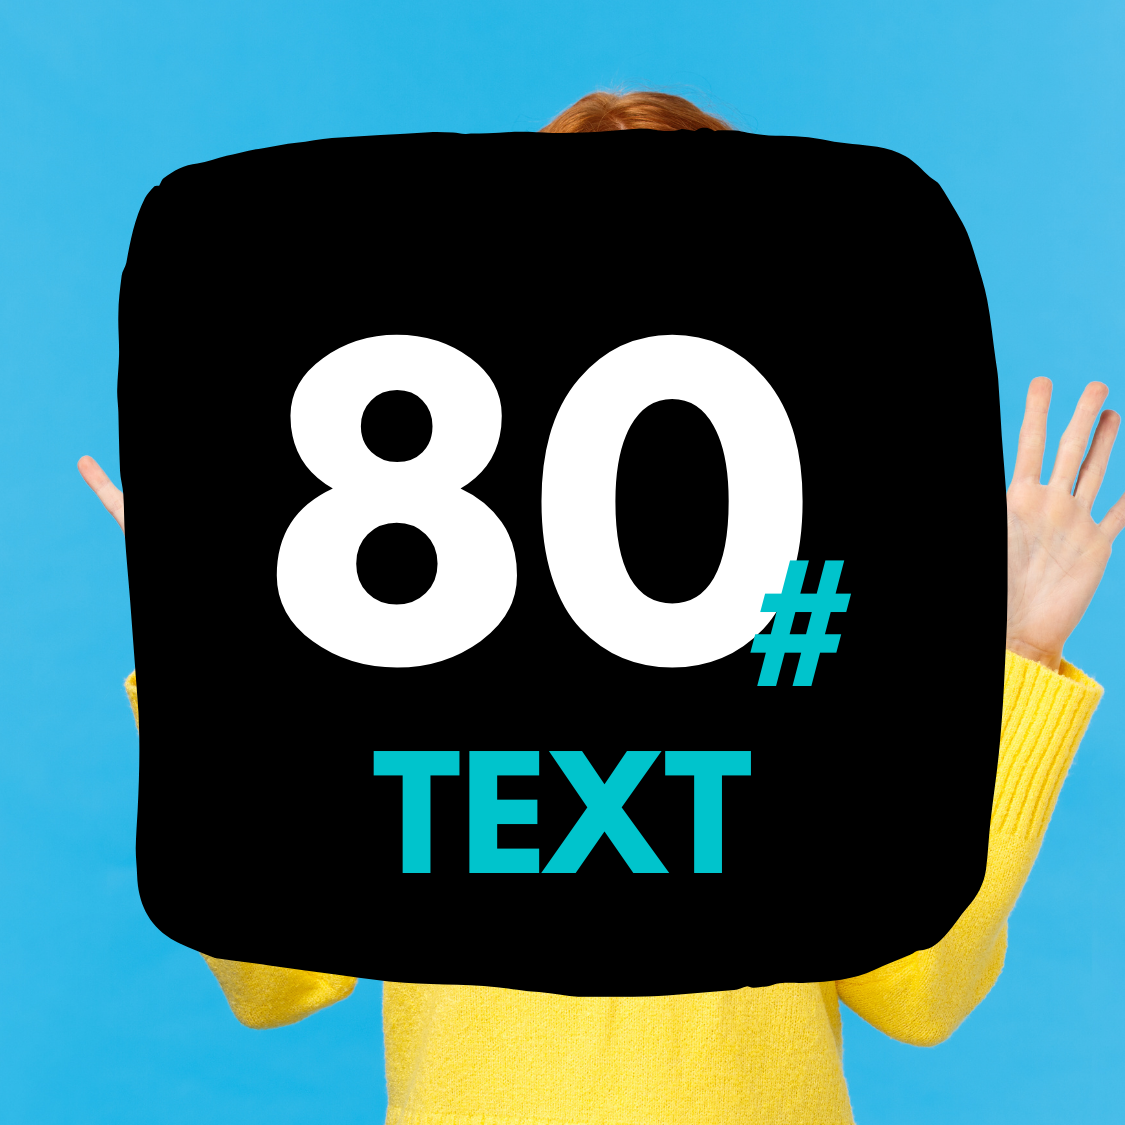 80# Text